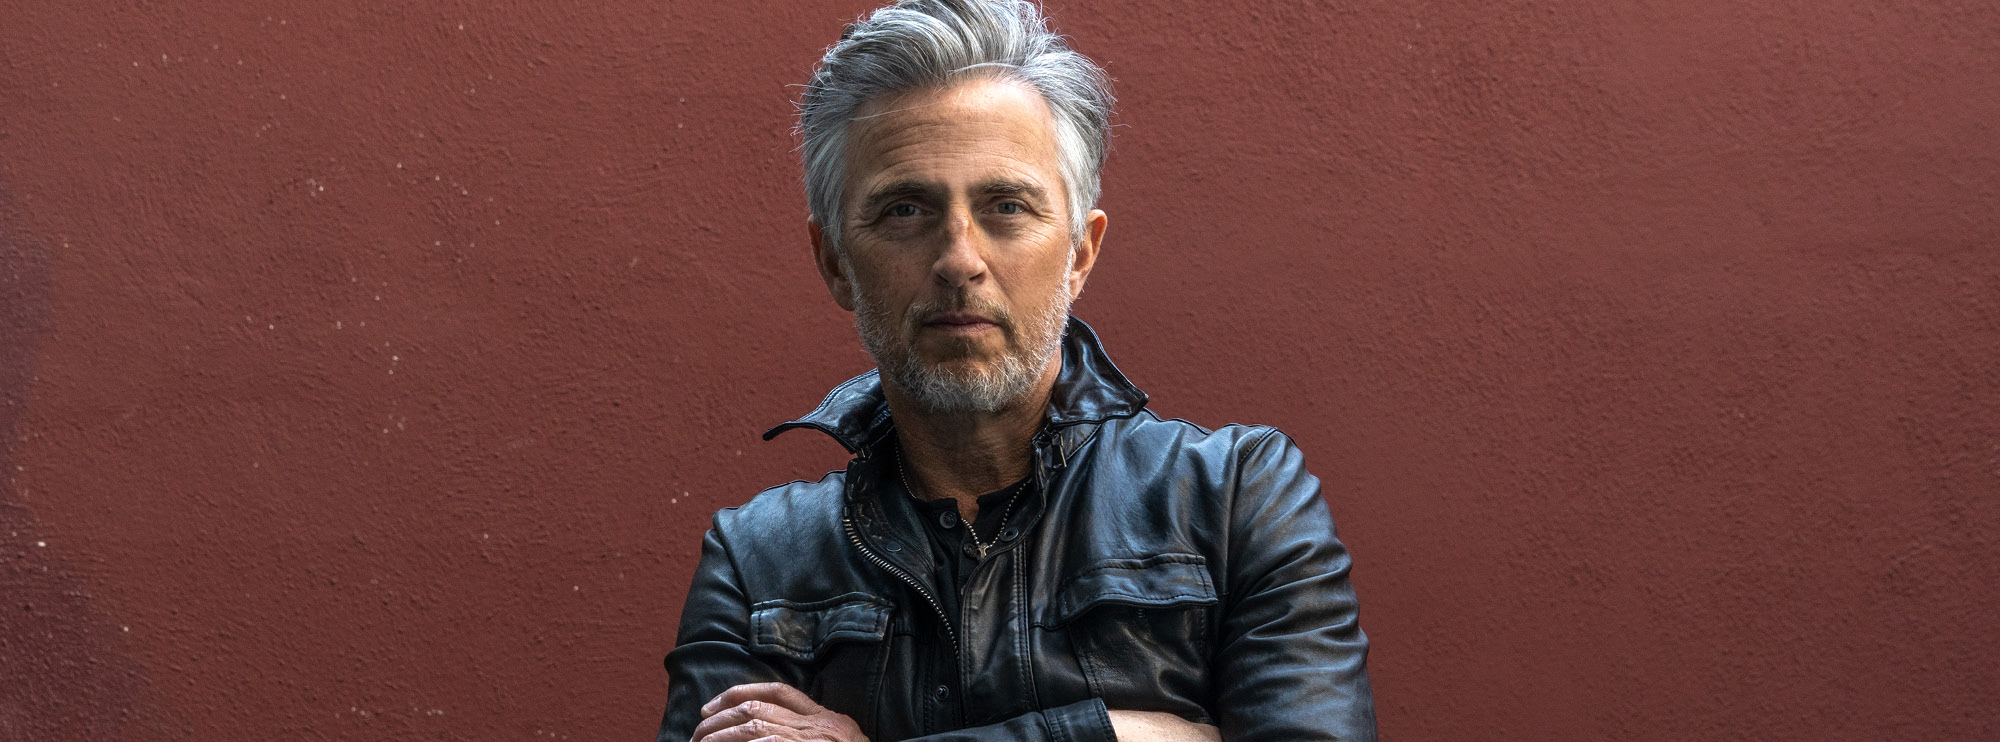 Image of Colin James with his arms crossed atop his body, standing before a dark red wall. He has warm-toned skin, grey hair and a grey beard. He wears a black leather jacket and looks straight ahead.